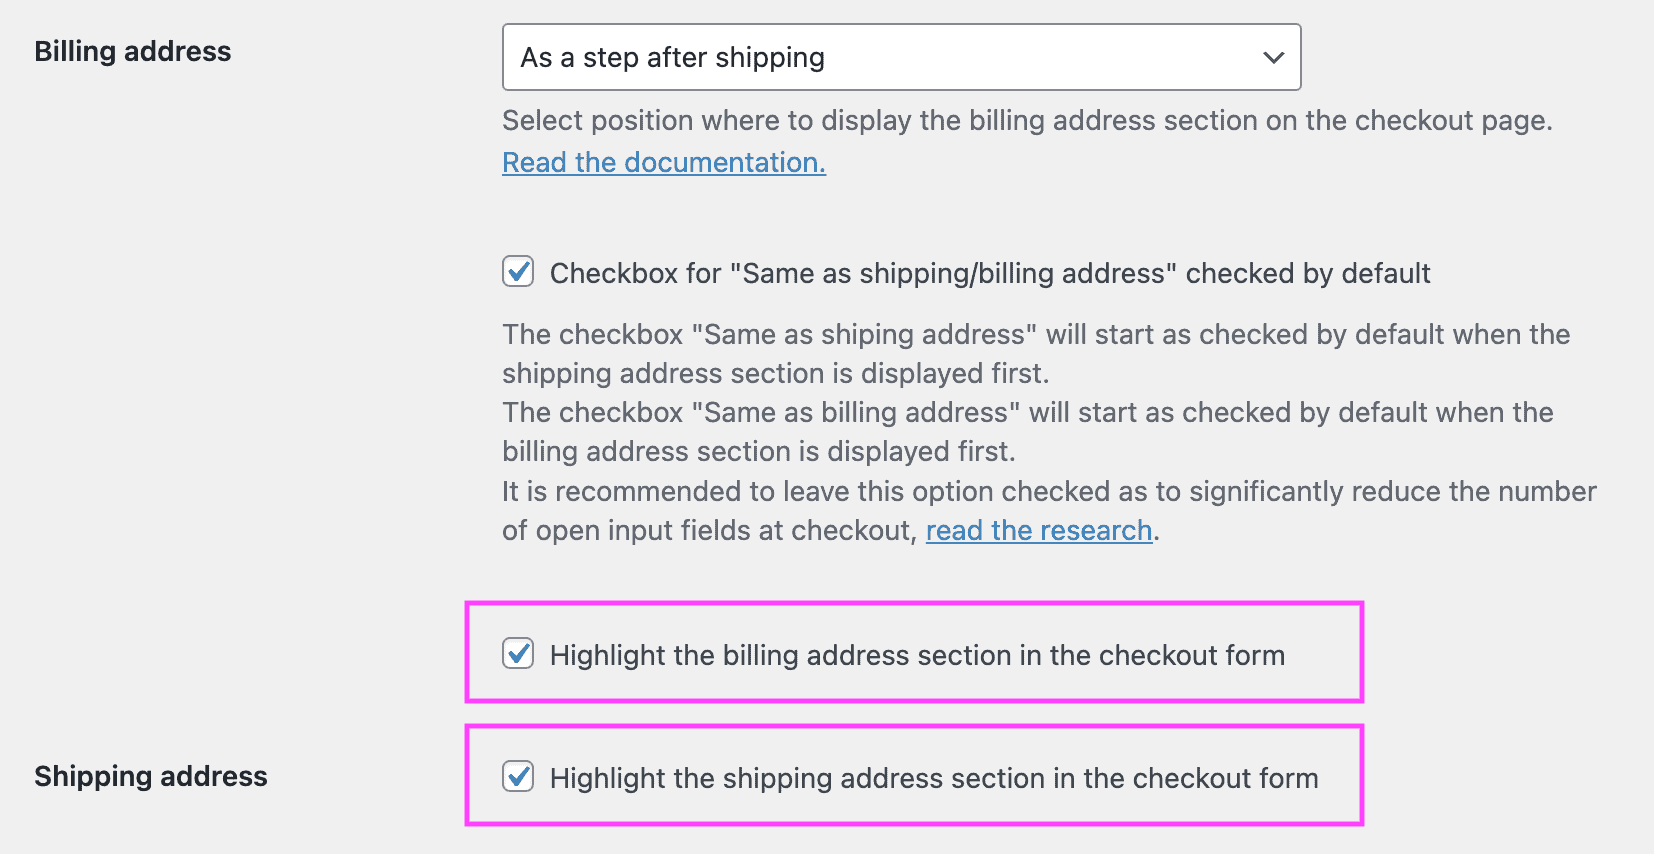 Screenshot of the options to highlight the billing address and shipping address sections on the checkout page.